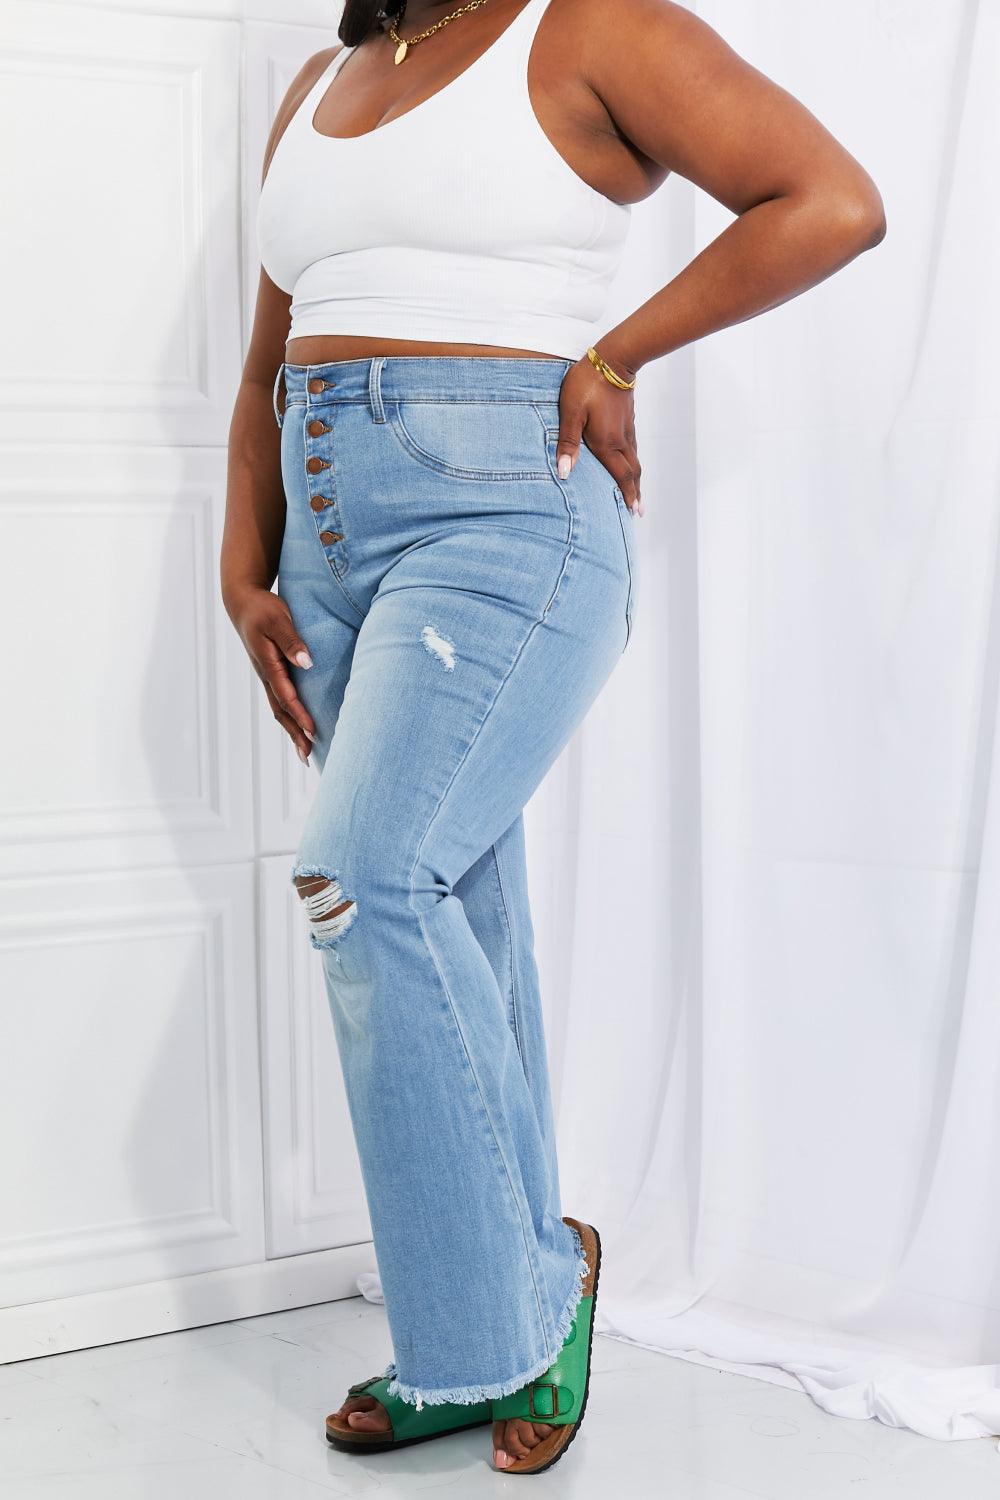 Jovial Flare Distressed Plus Size Button Fly Jeans - MXSTUDIO.COM